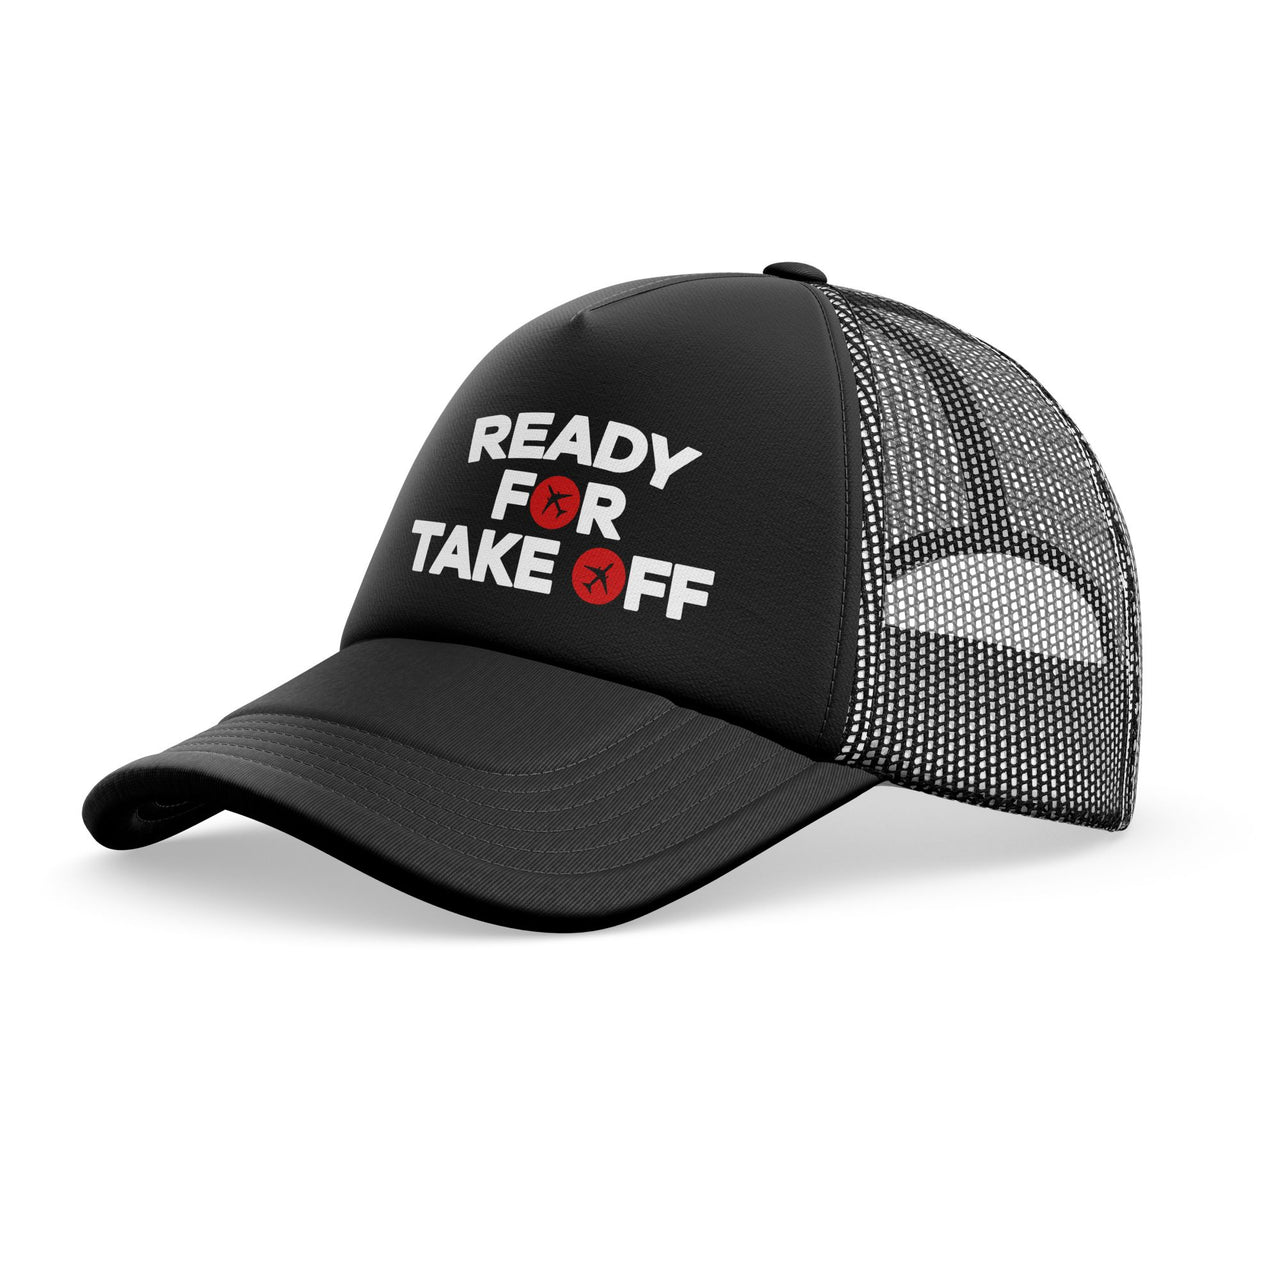 Ready For Takeoff Designed Trucker Caps & Hats